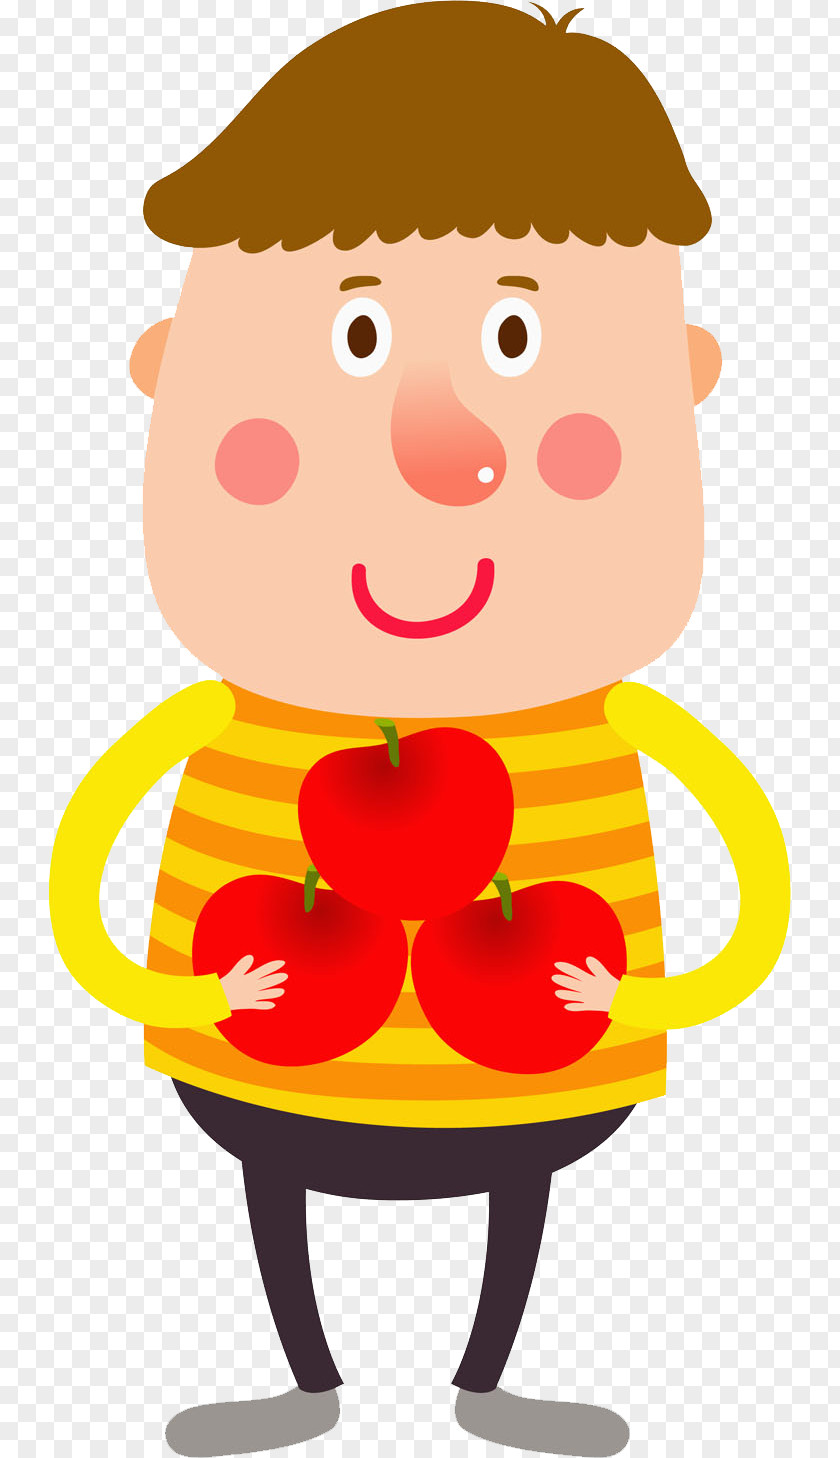 The Boy With Apple Mathematics Child Toddler Play PNG